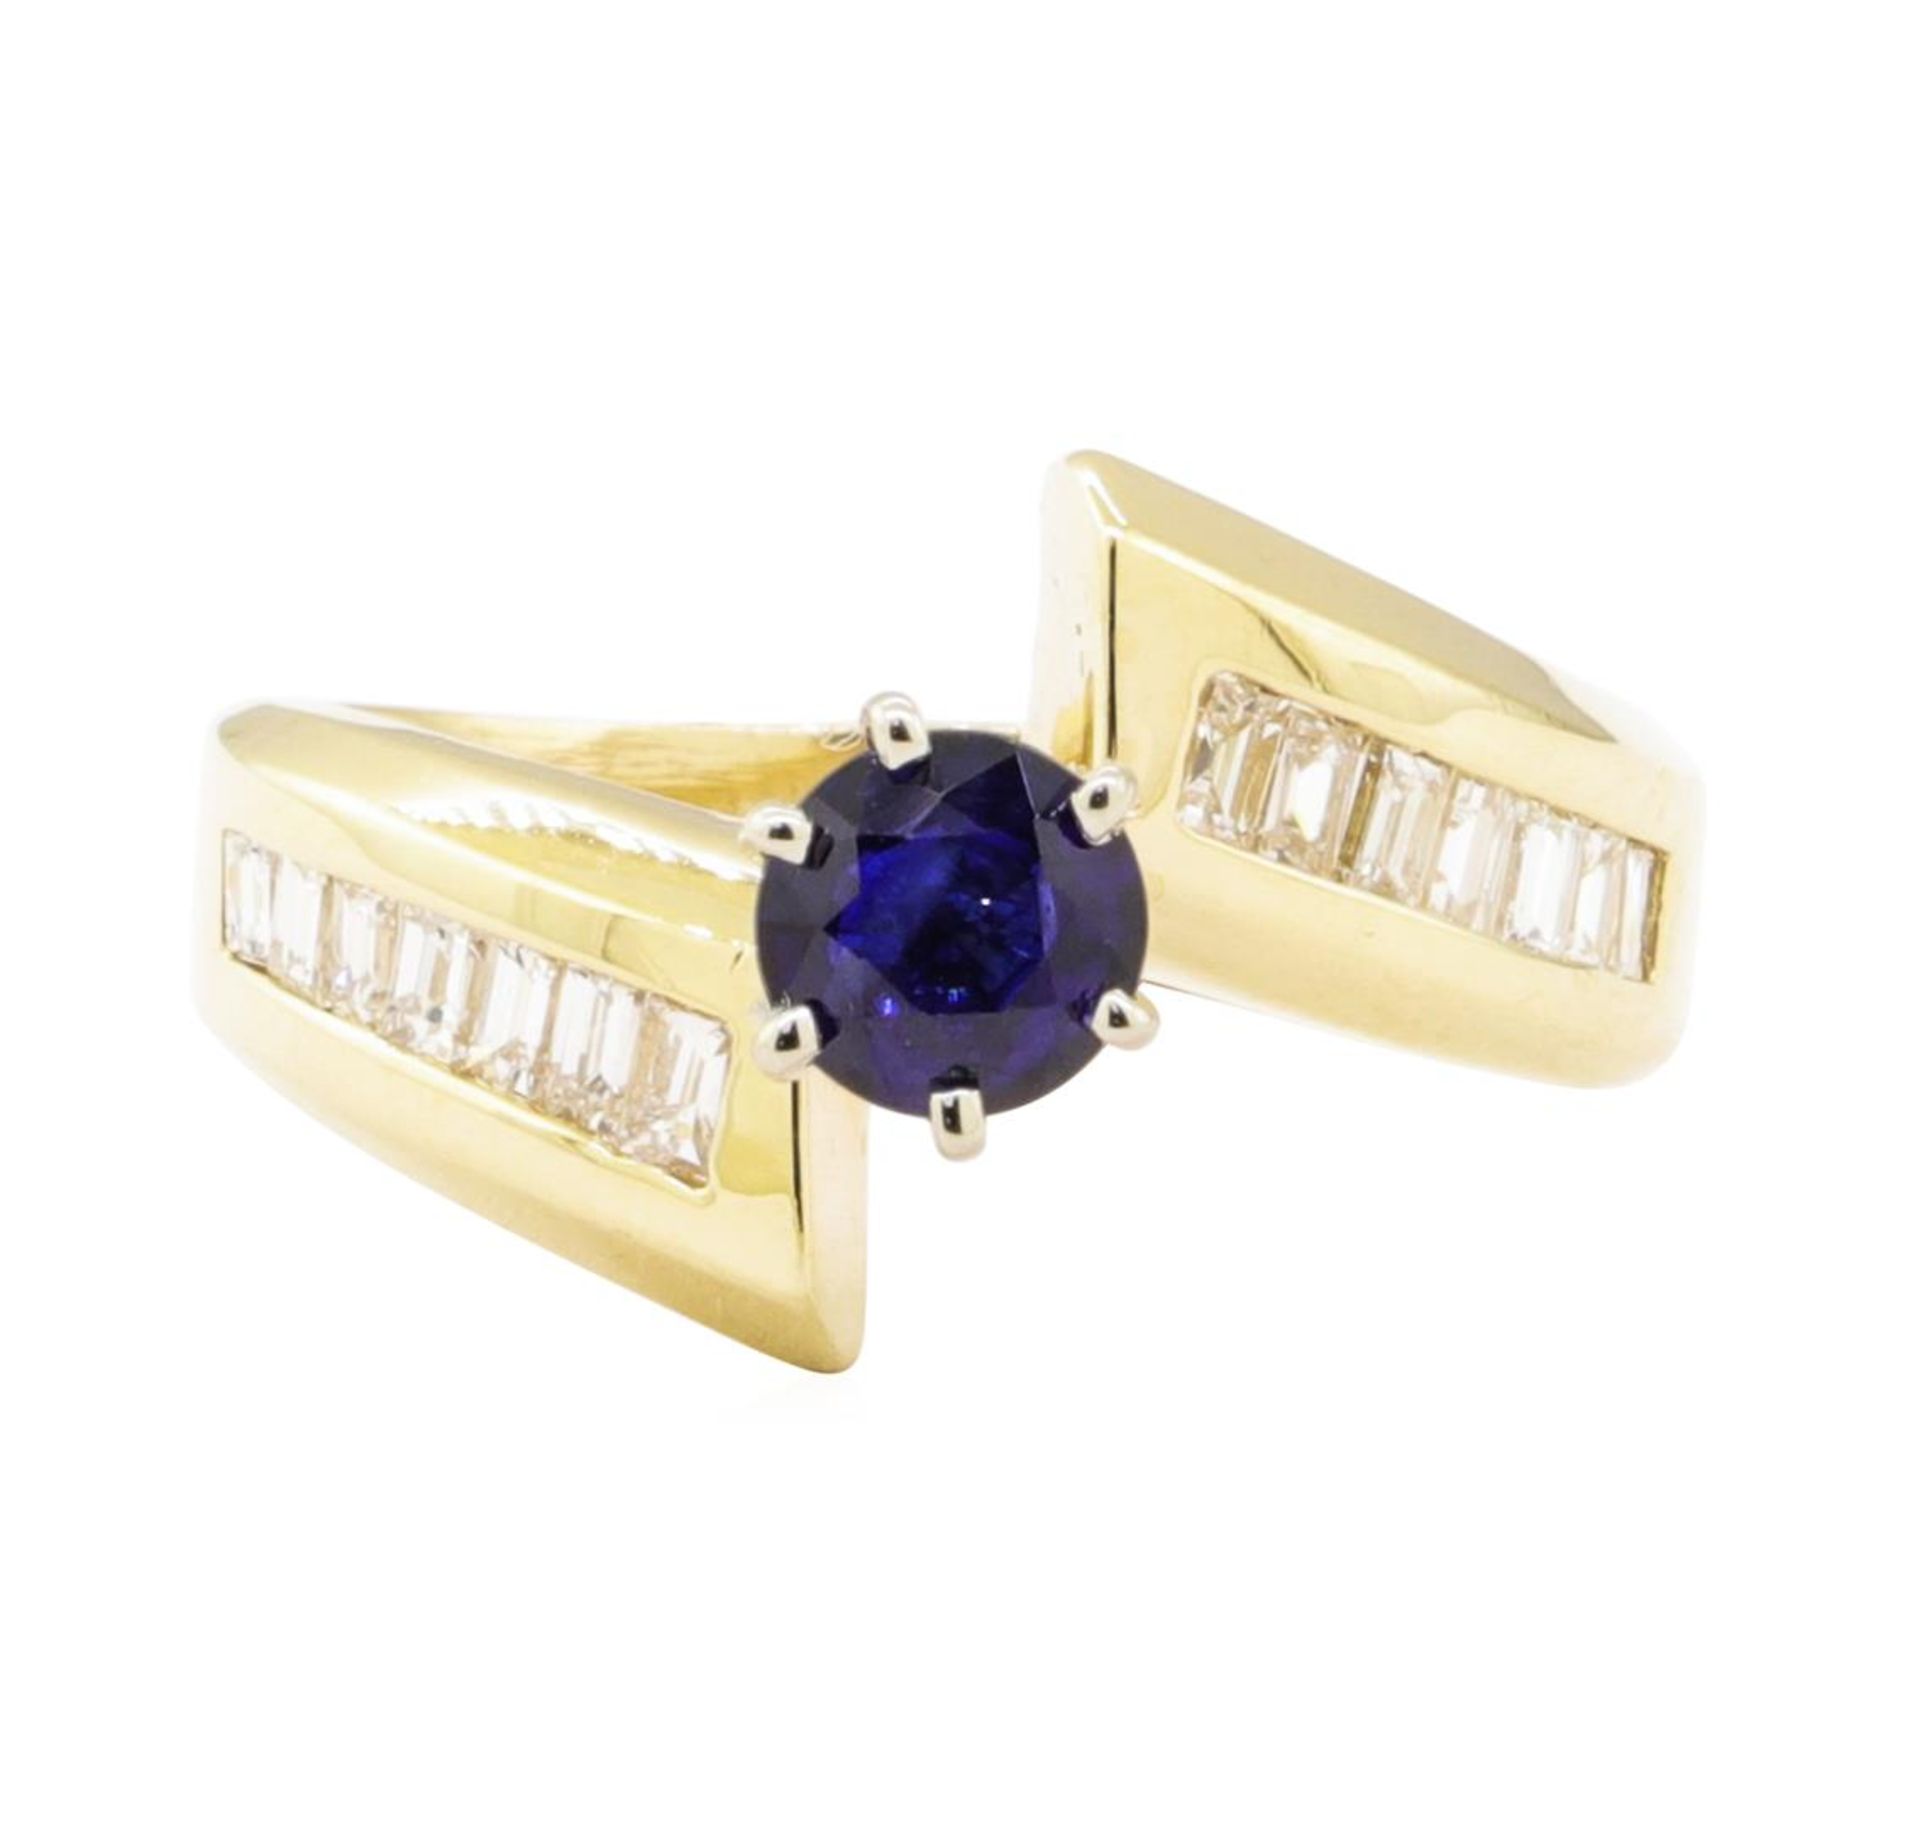 1.31ctw Blue Sapphire and Diamond Ring - 14KT Yellow Gold - Image 2 of 4